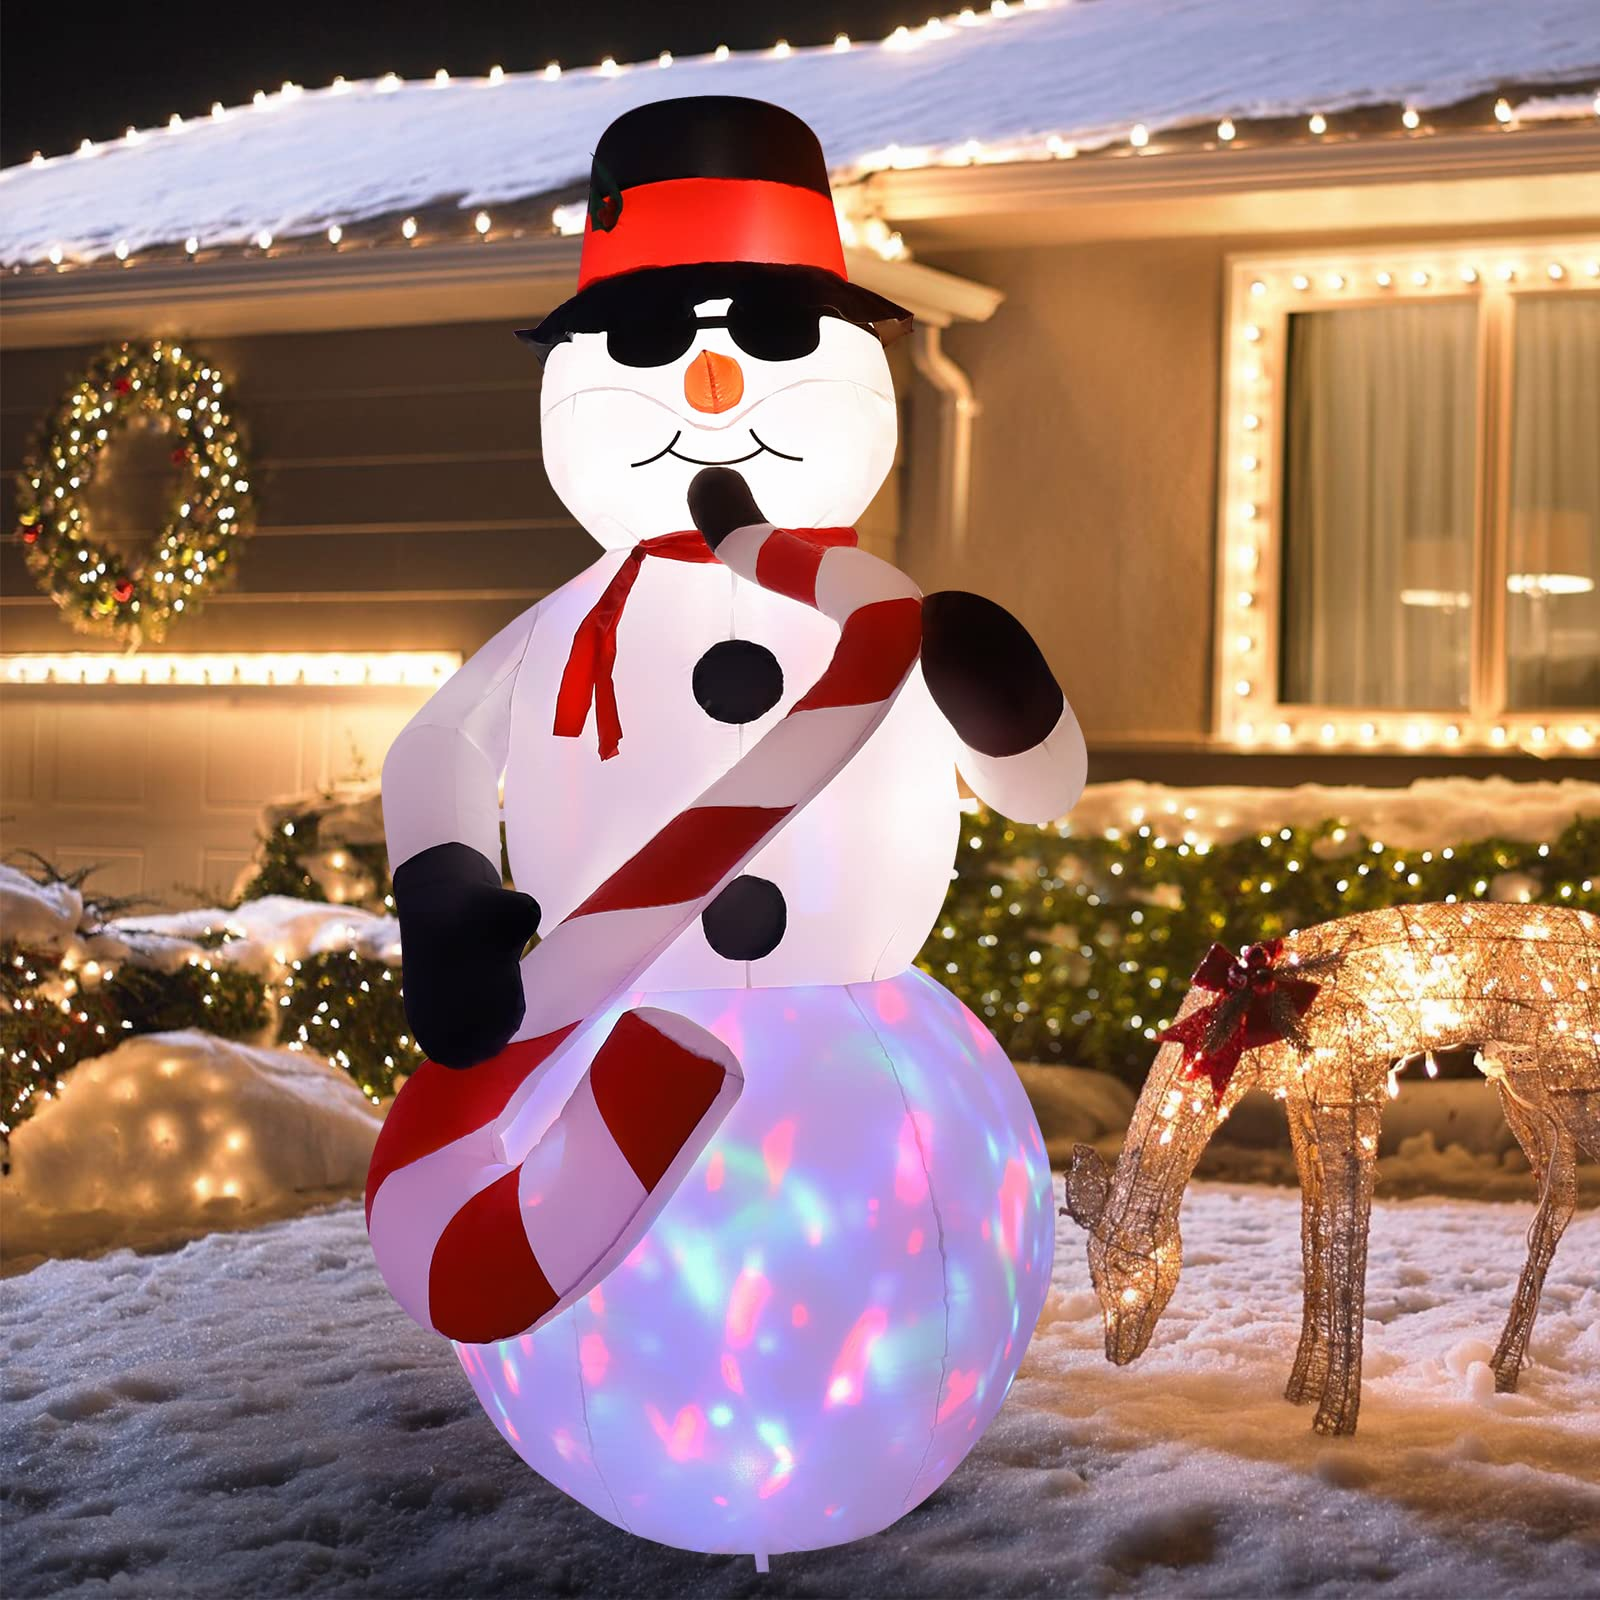 8 FT Christmas Inflatables Snowman Outdoor Christmas Decorations ...